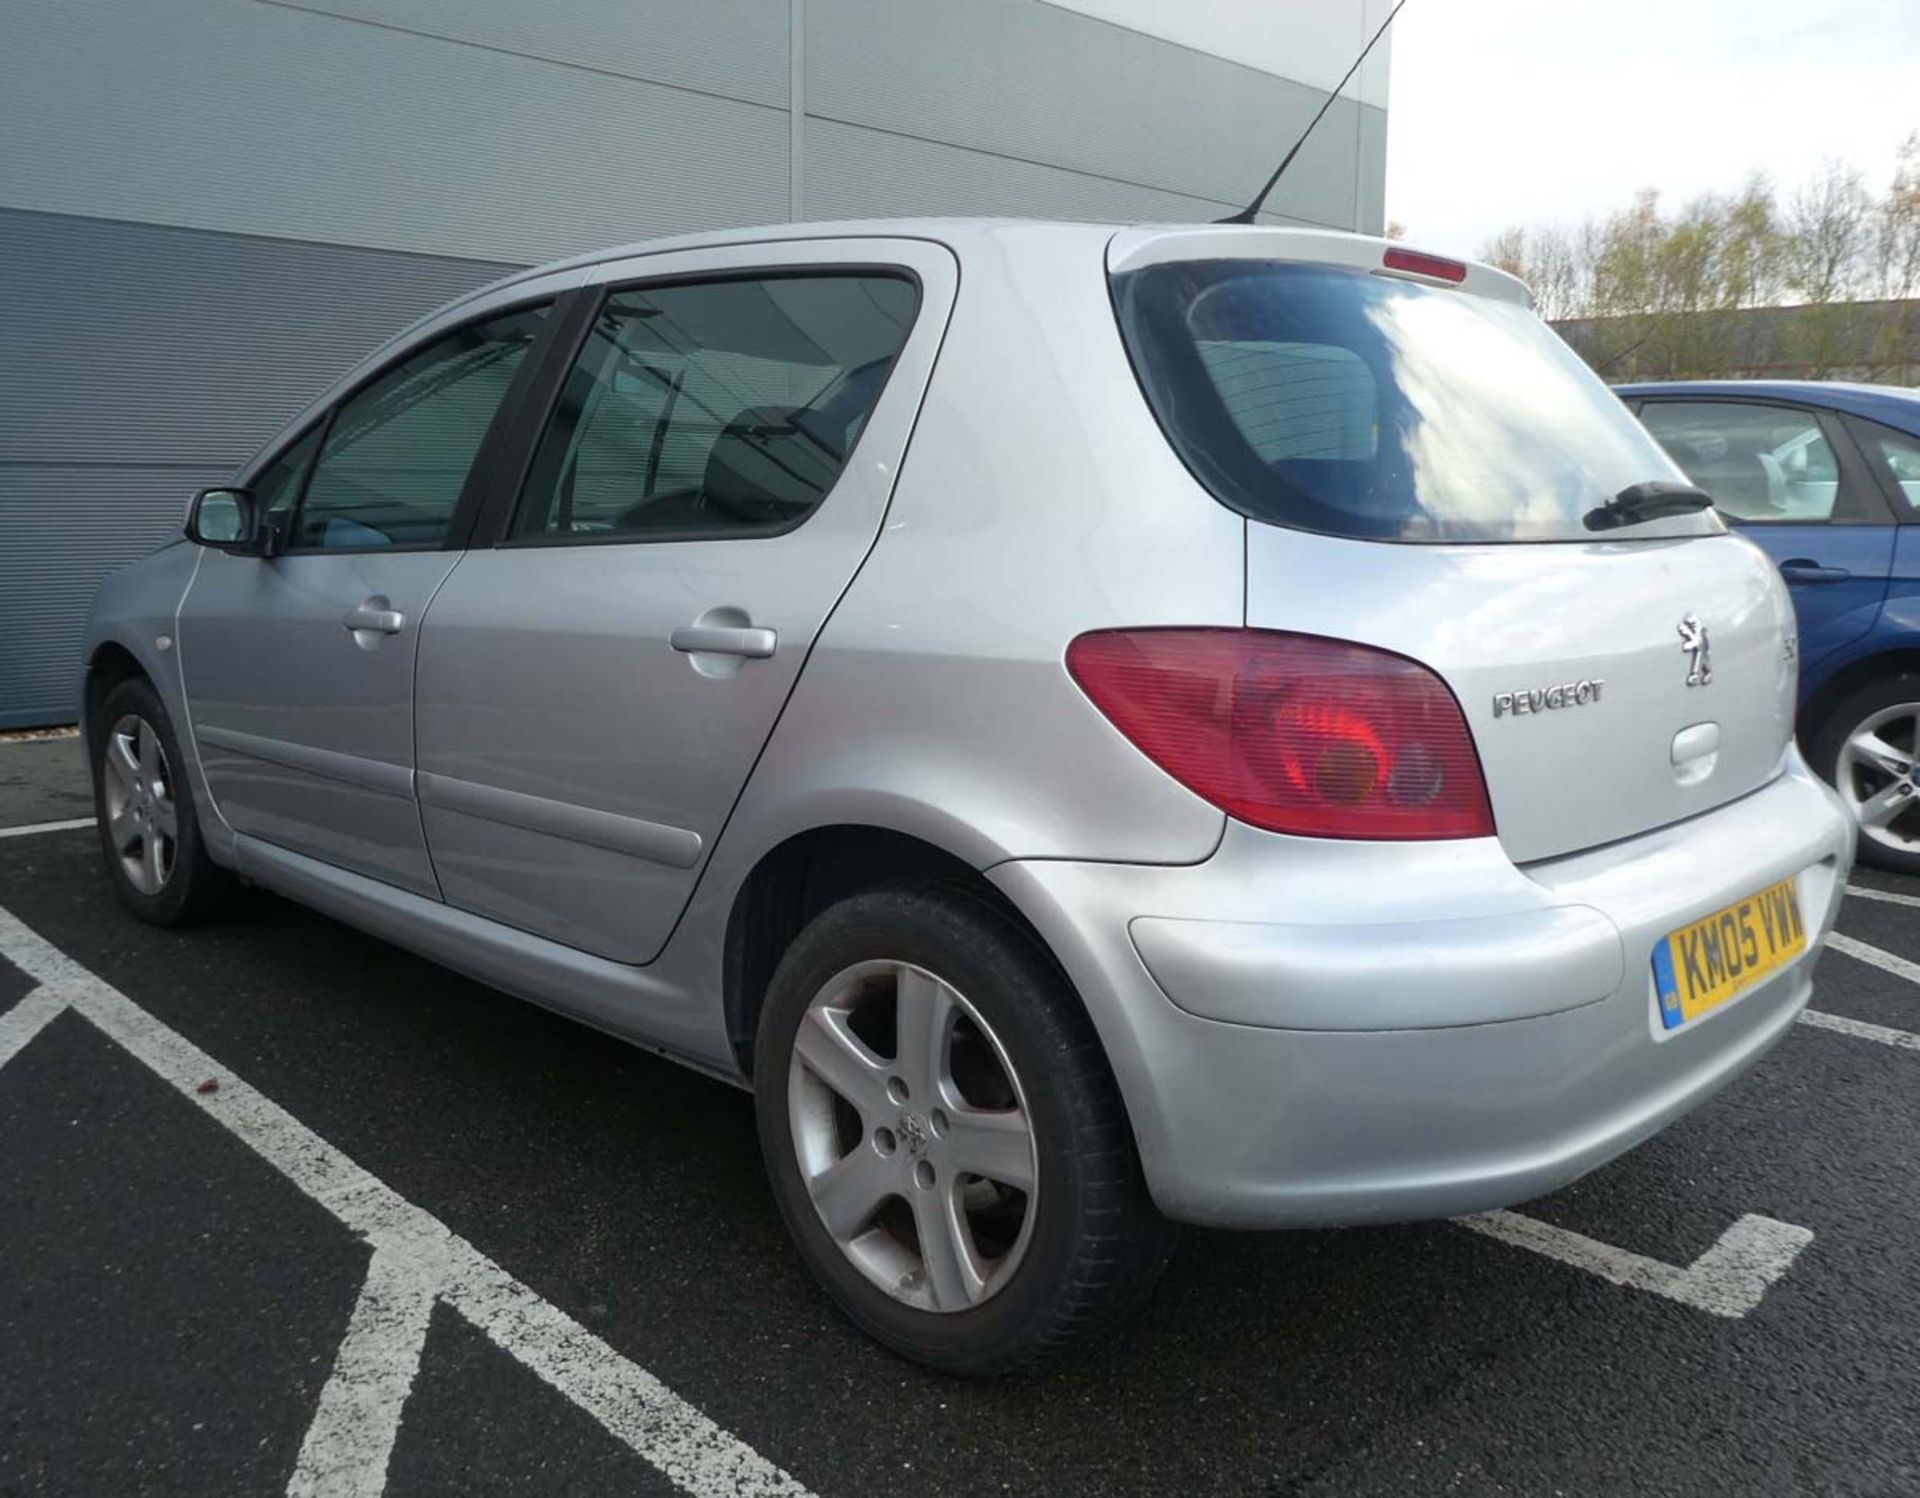 KM05 VWW (2005) Peugeot 307 in silver, 1560cc, diesel, 4 former keepers, 1 key, first registered - Image 4 of 10